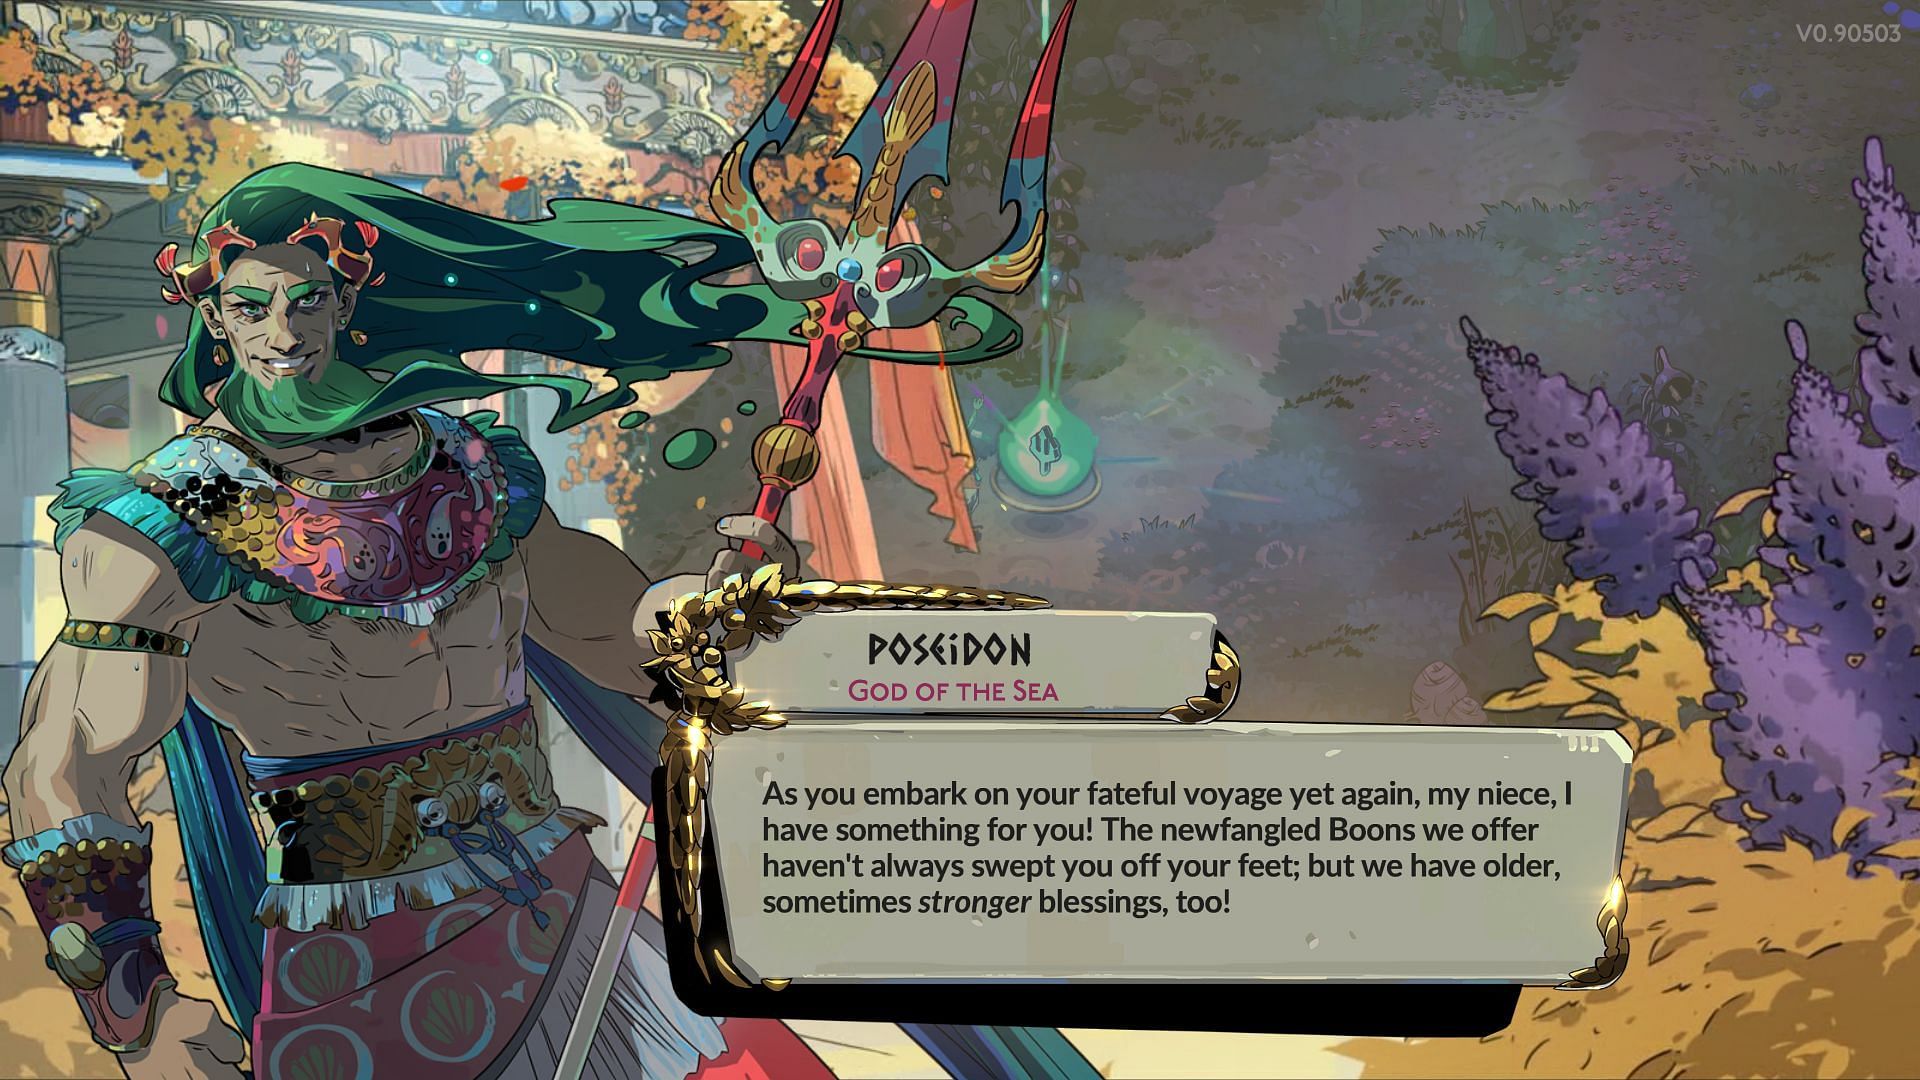 Poseidon offers extremely potent boons to Melino&euml; (Image via Supergiant Games)